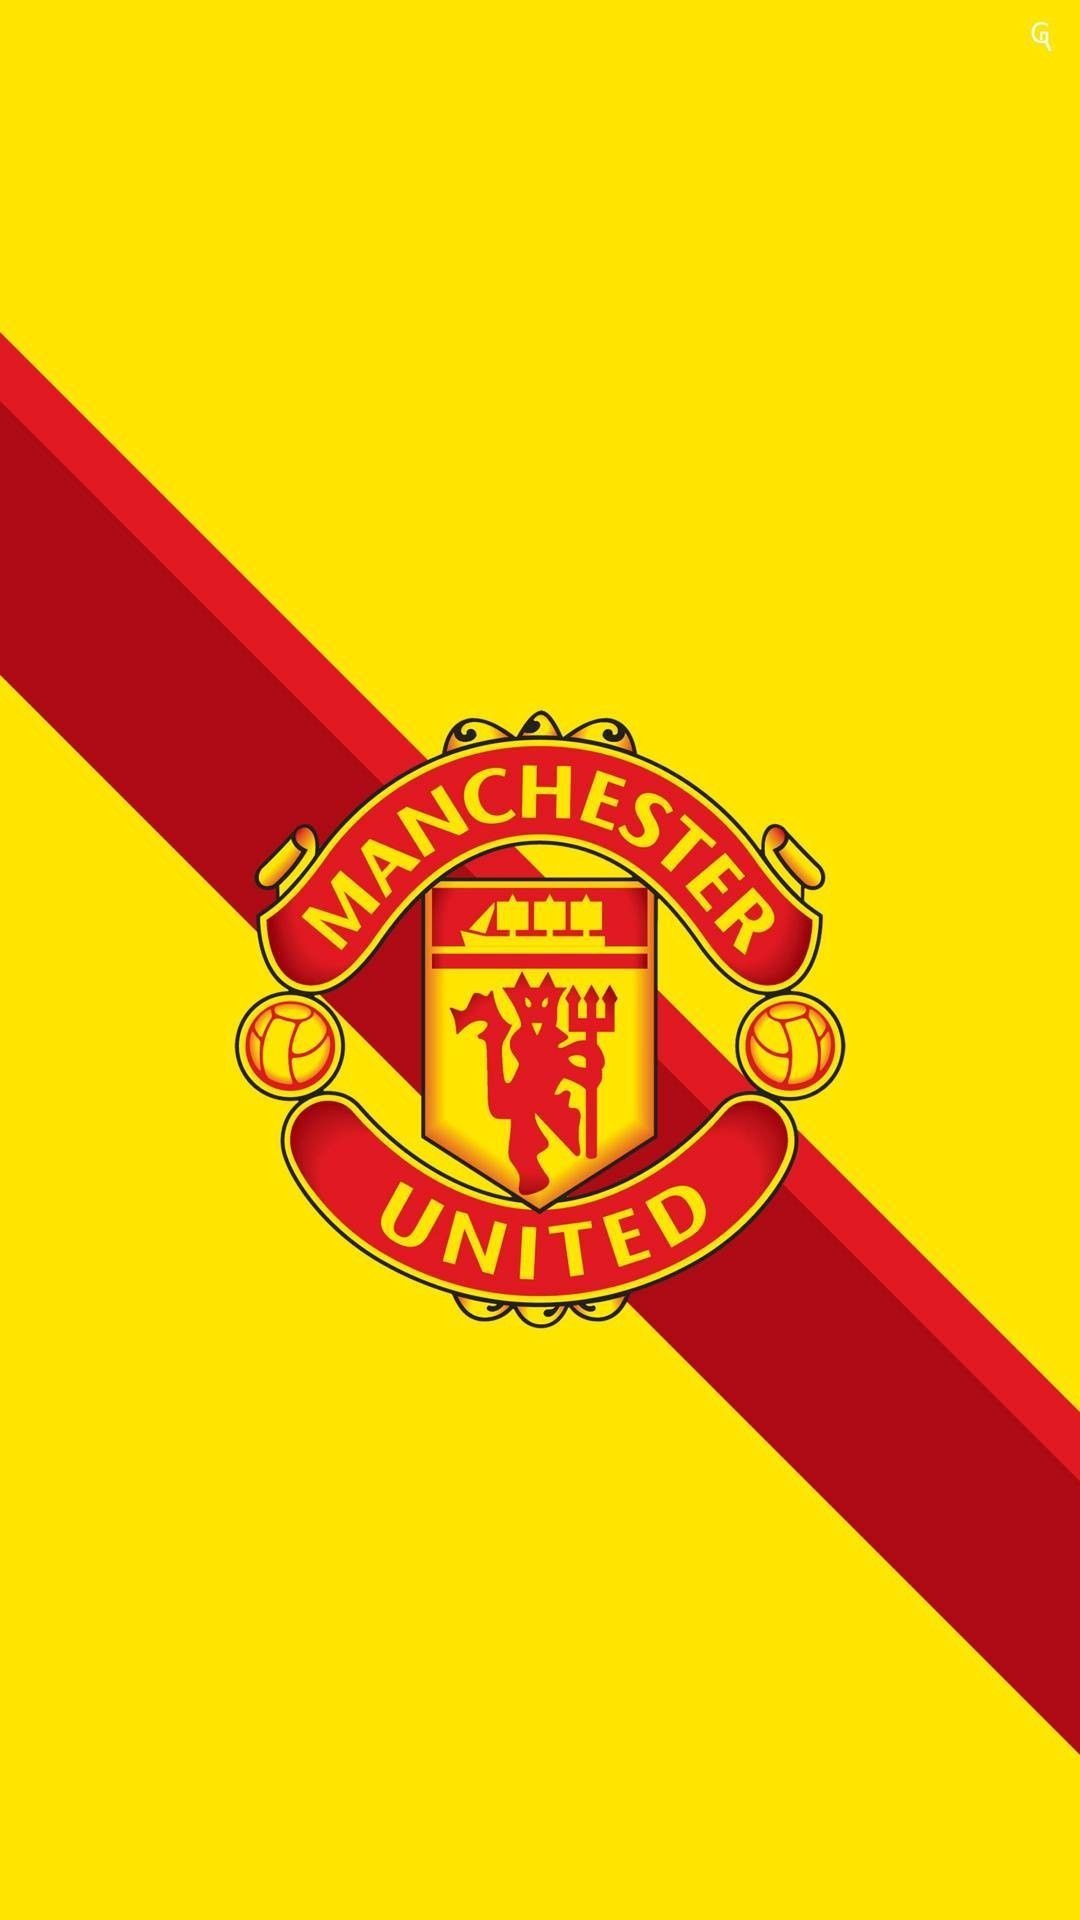 Manchester United, Iconic logo, Striking visuals, Emblematic team, 1080x1920 Full HD Phone